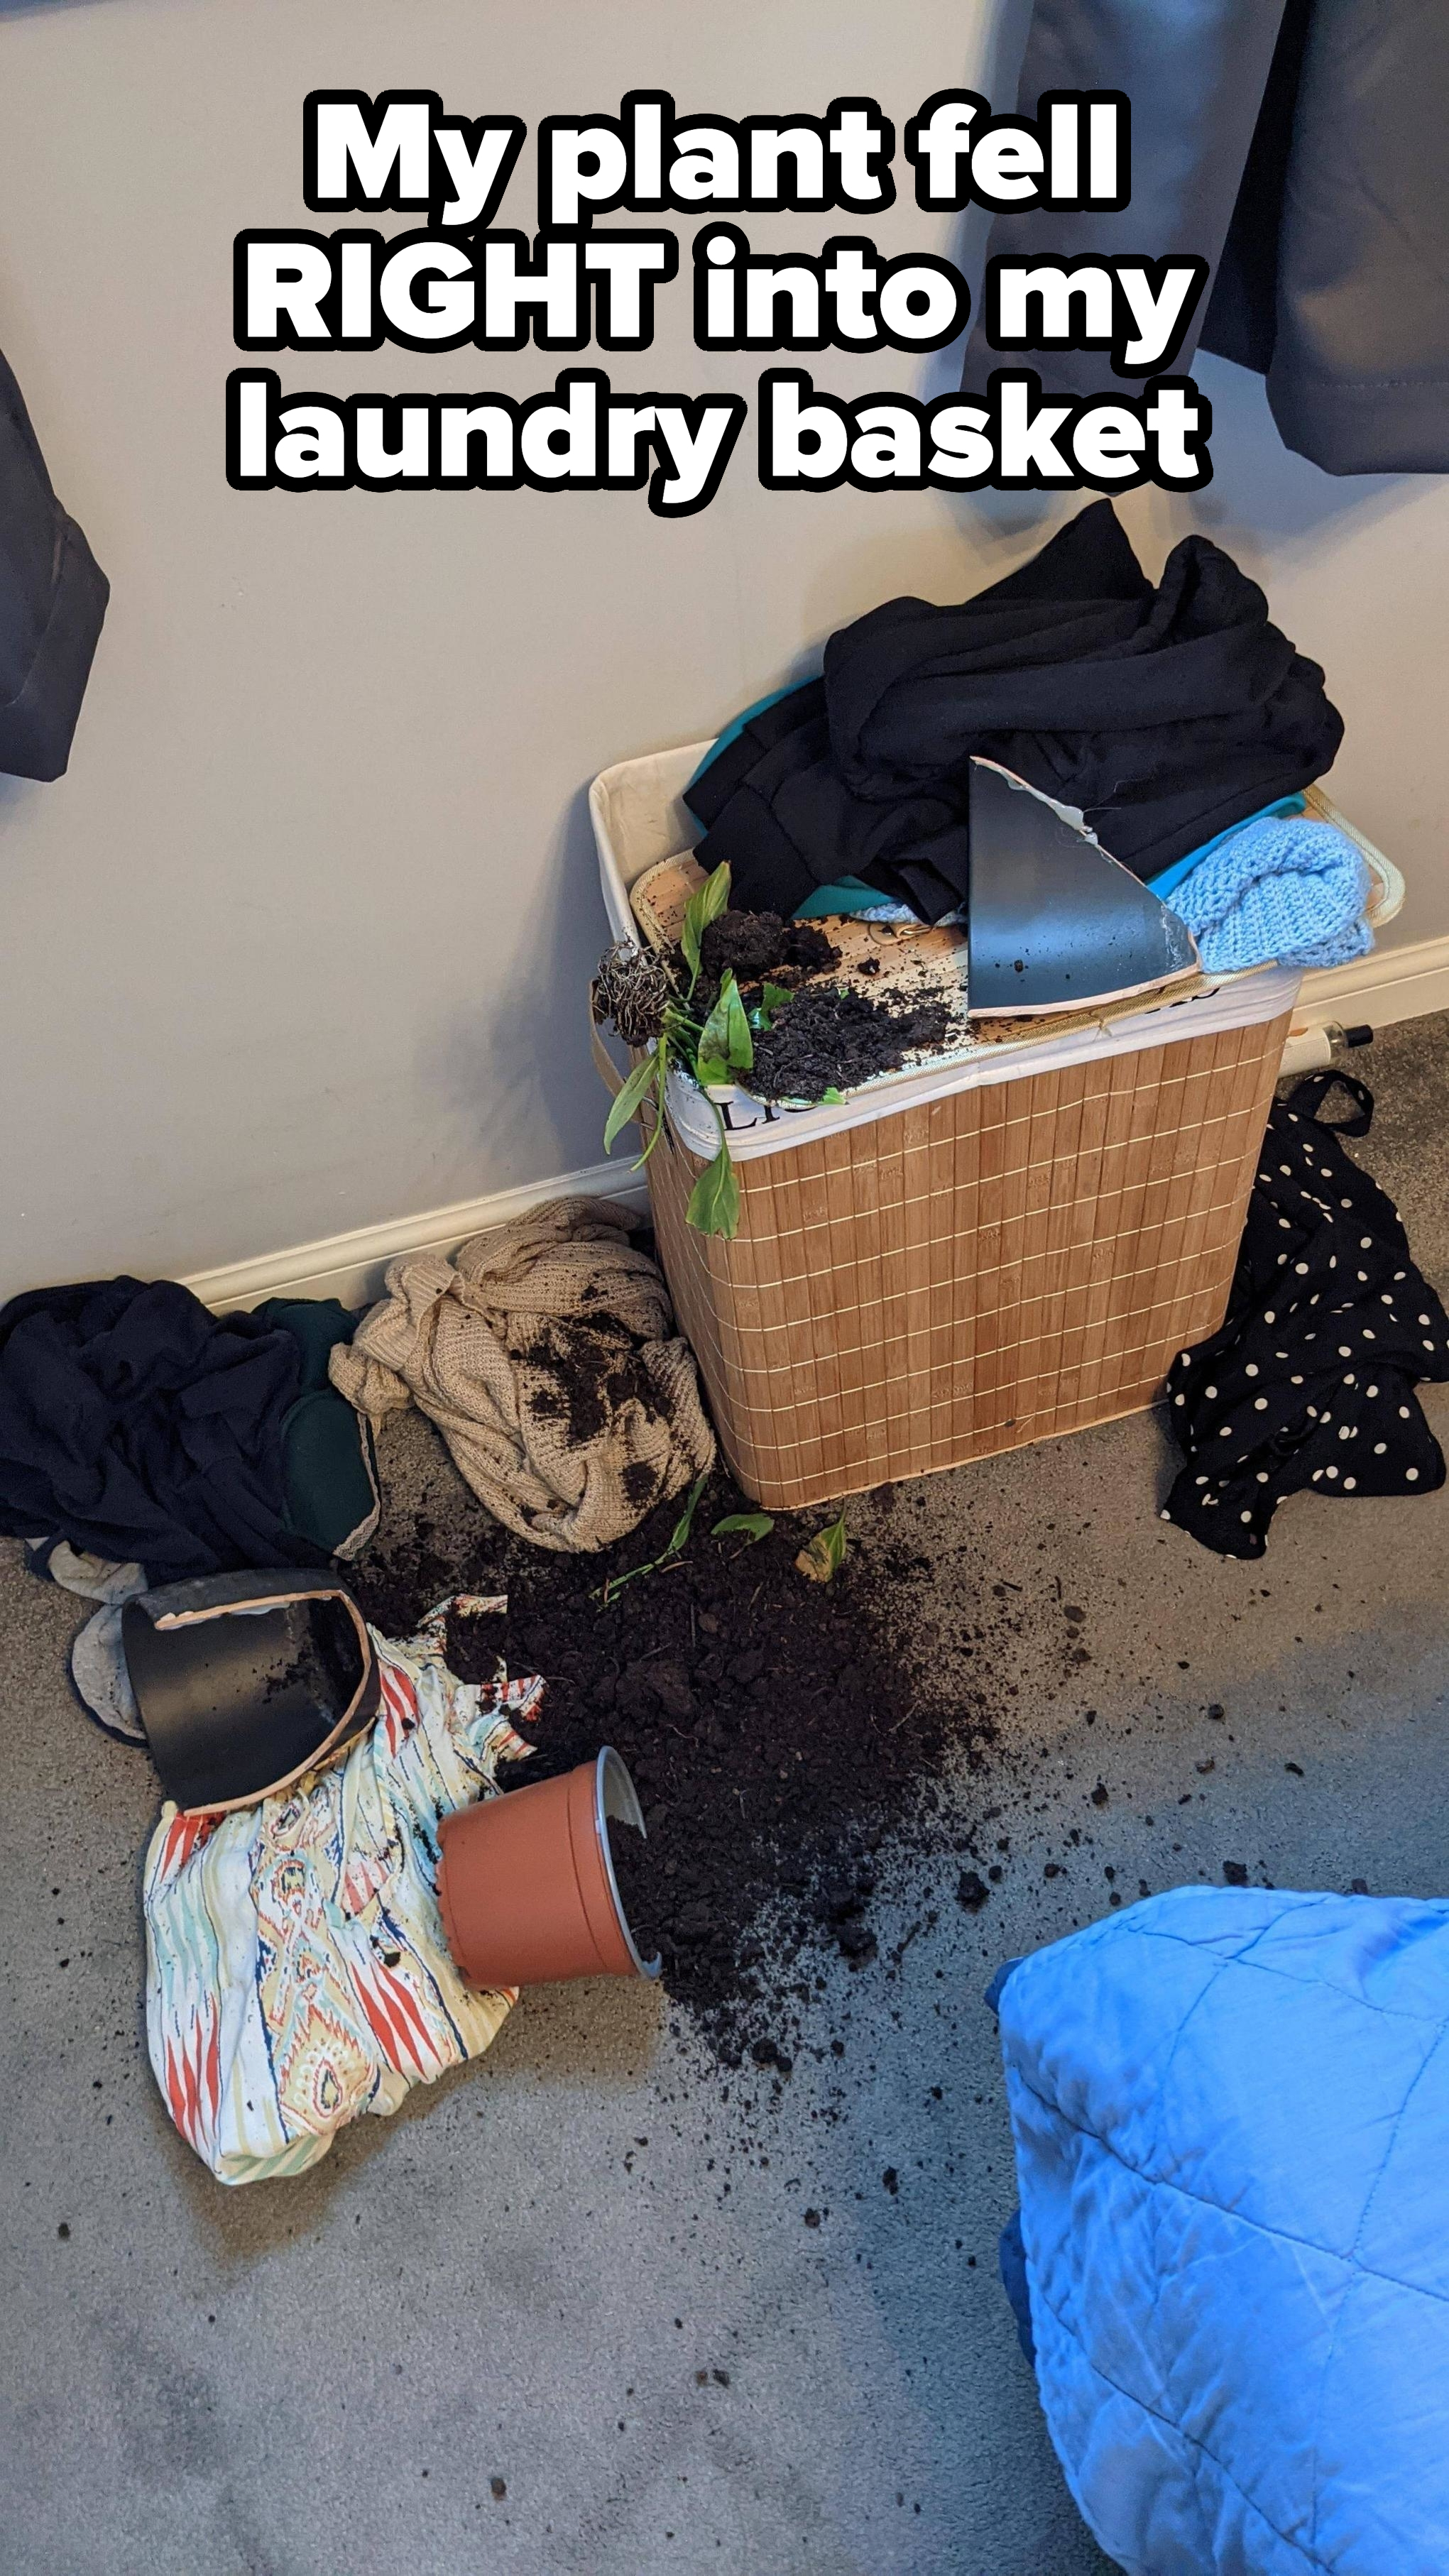 Overturned plant pot with soil spilled inside a laundry basket and on clothes and the floor